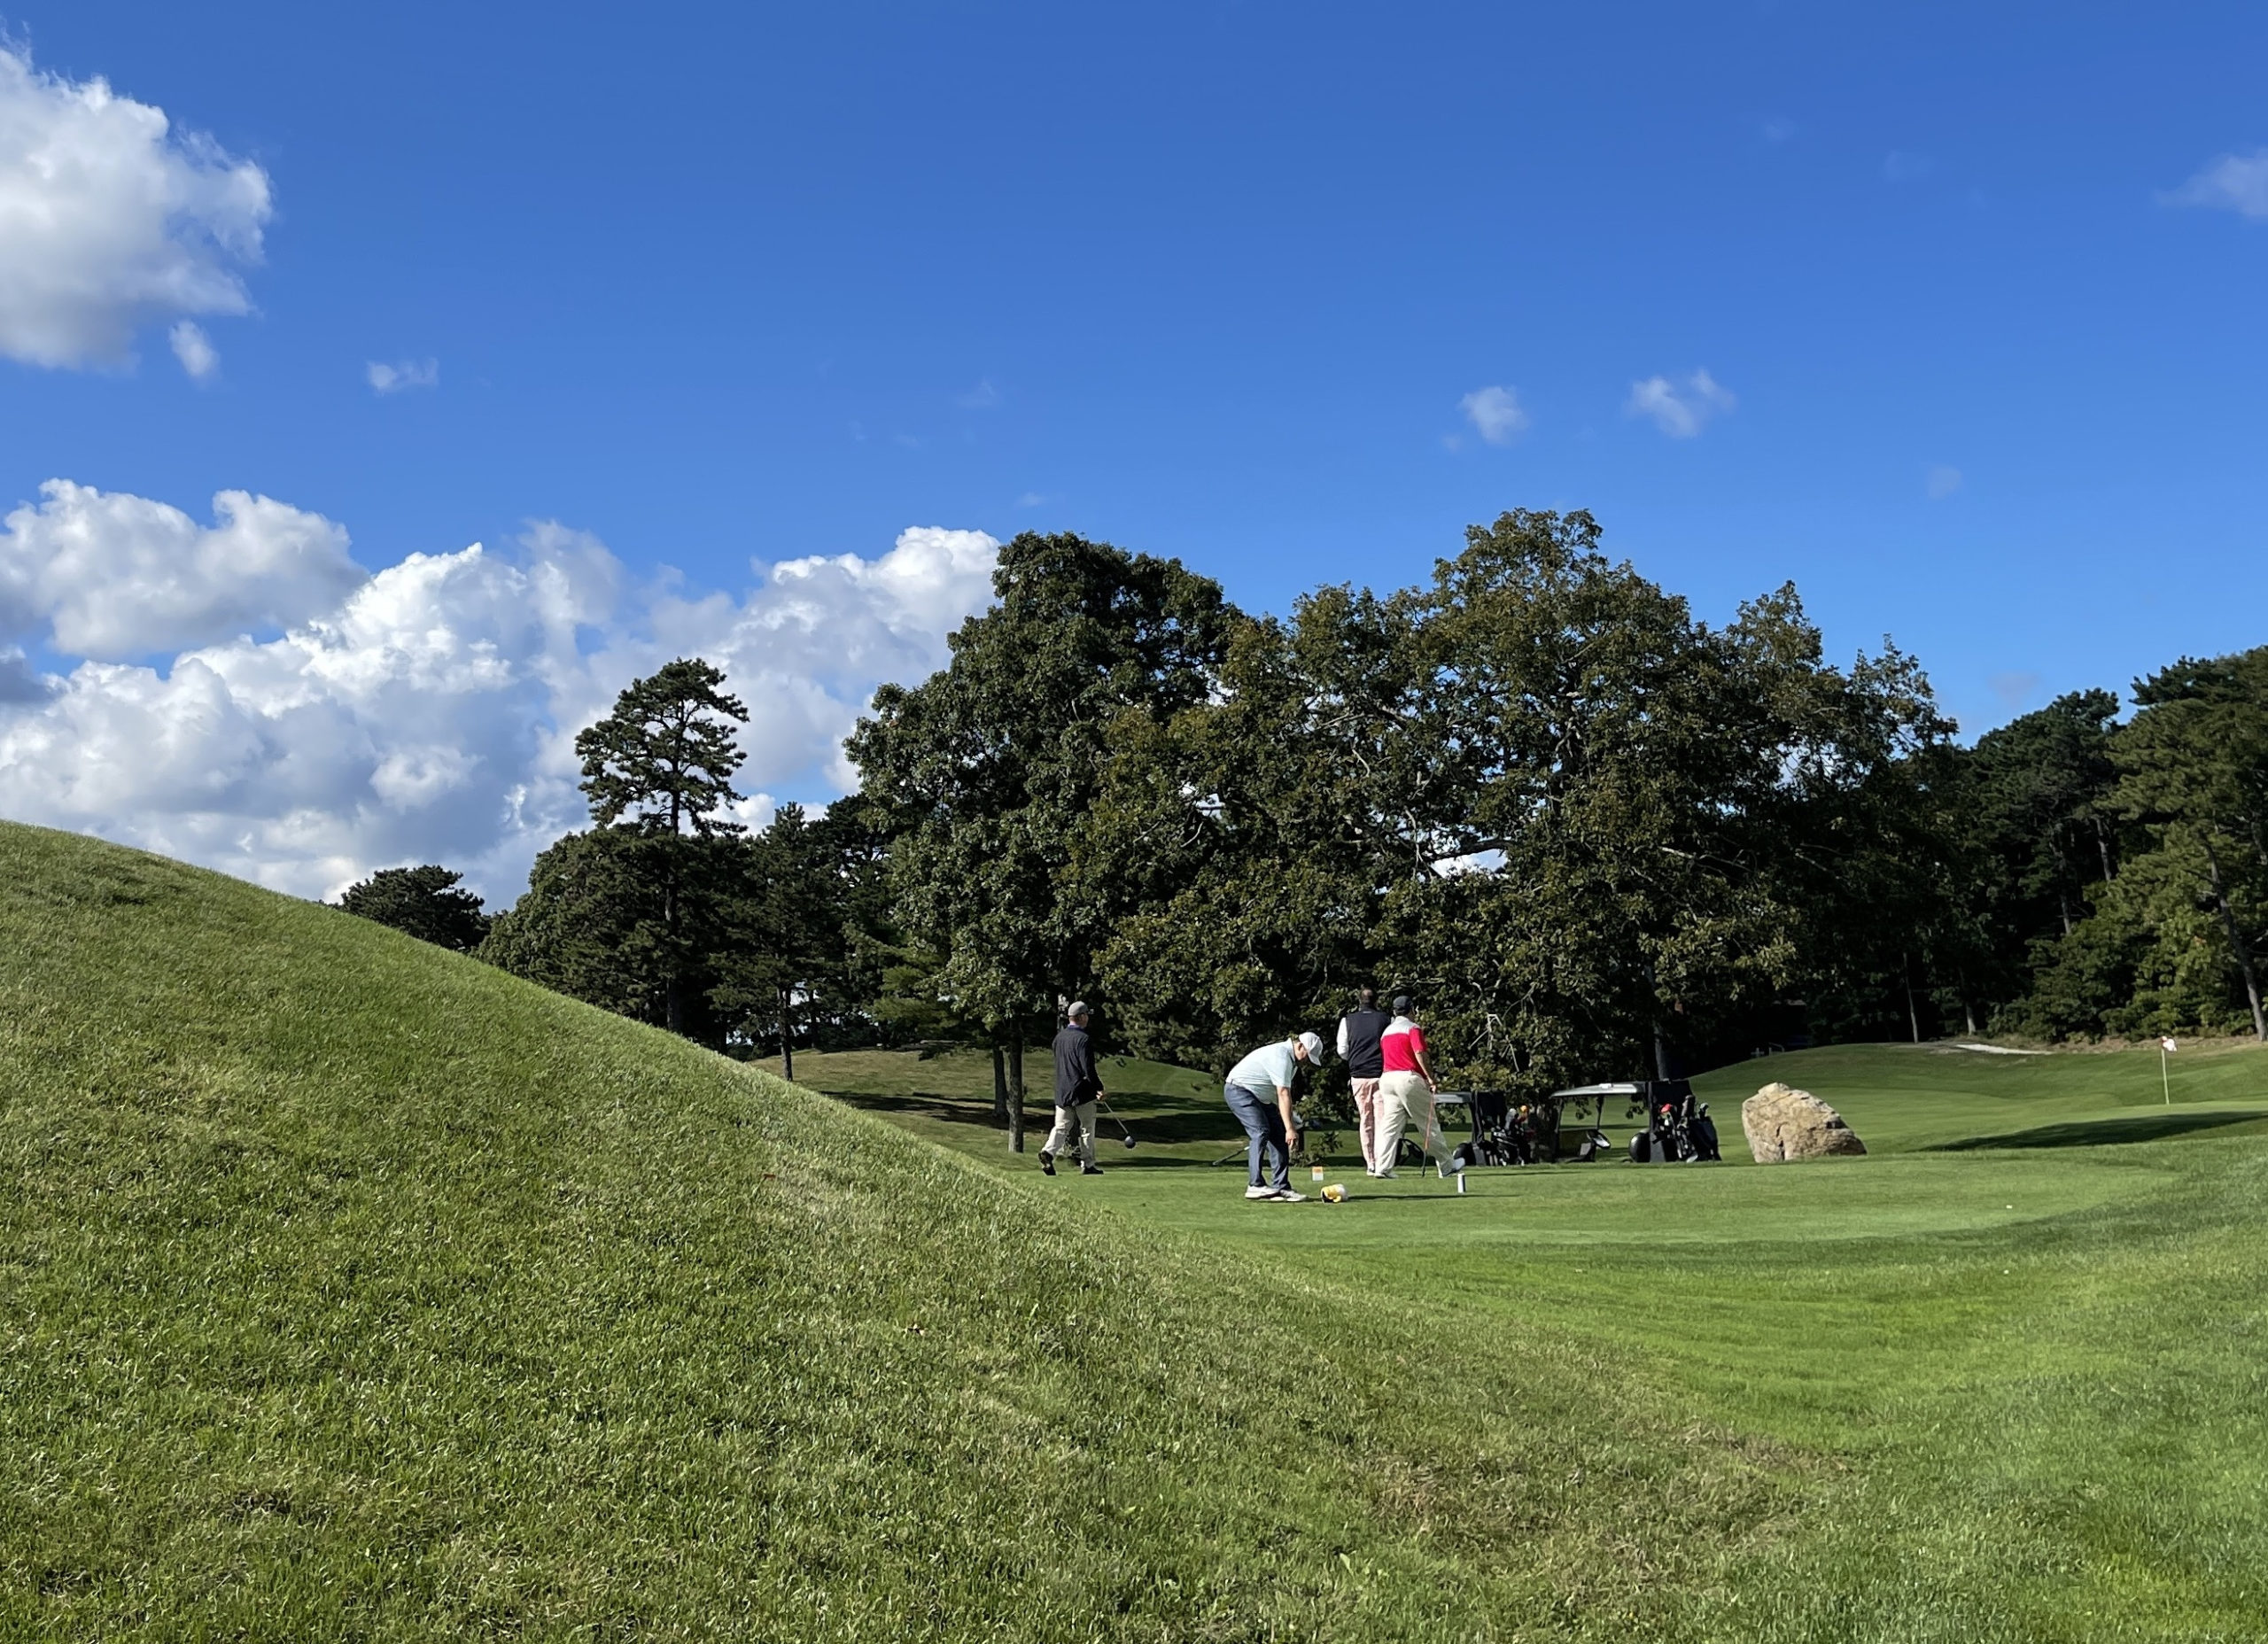 Several people golfing under blue sky in Falmouth